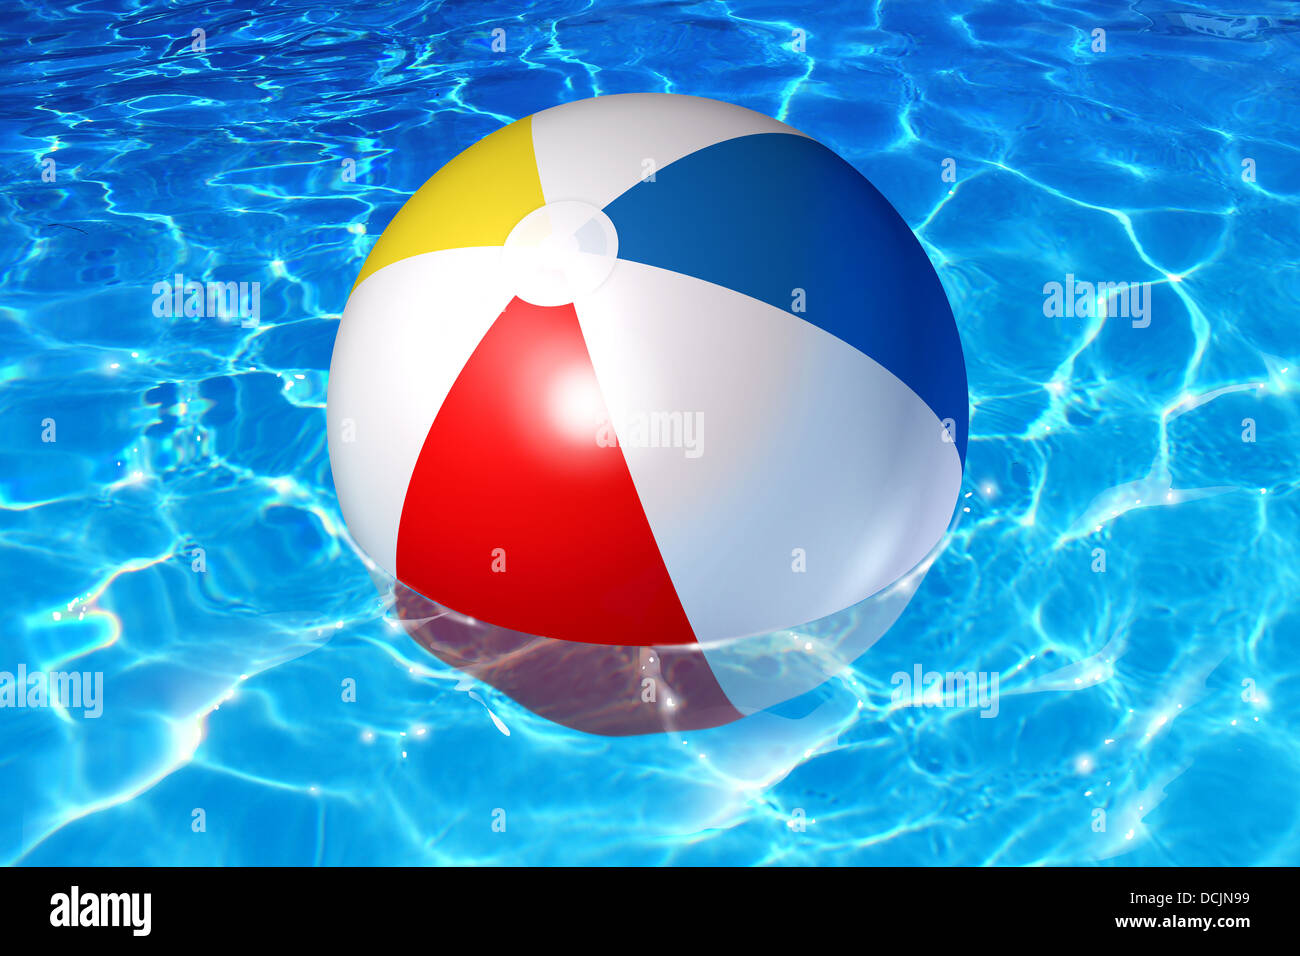 Pool fun concept with an inflatable plastic beach ball floating in cool  crystal clear reflective water as a symbol of vacation relaxation in a  family backyard or liesure activity at a holiday